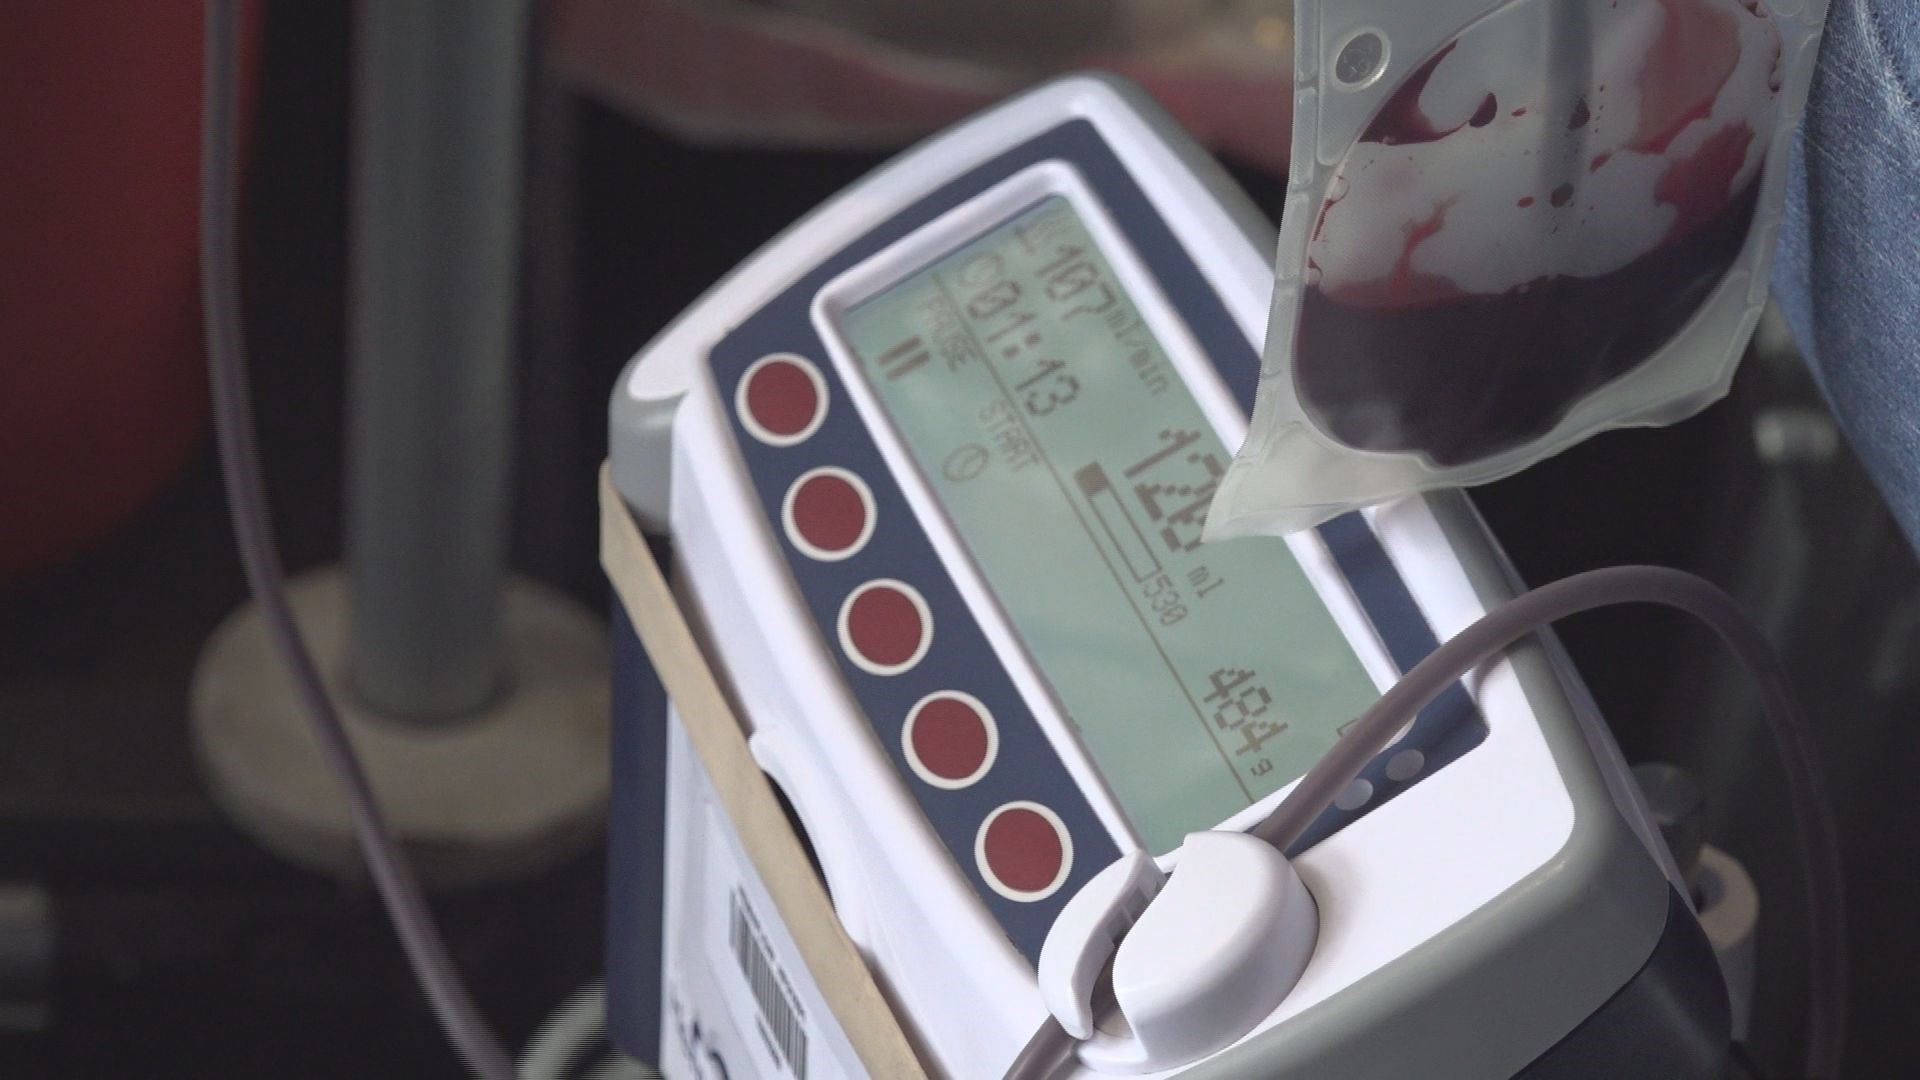 The national blood shortage affects the Permian Basin and gets worse around the holidays.